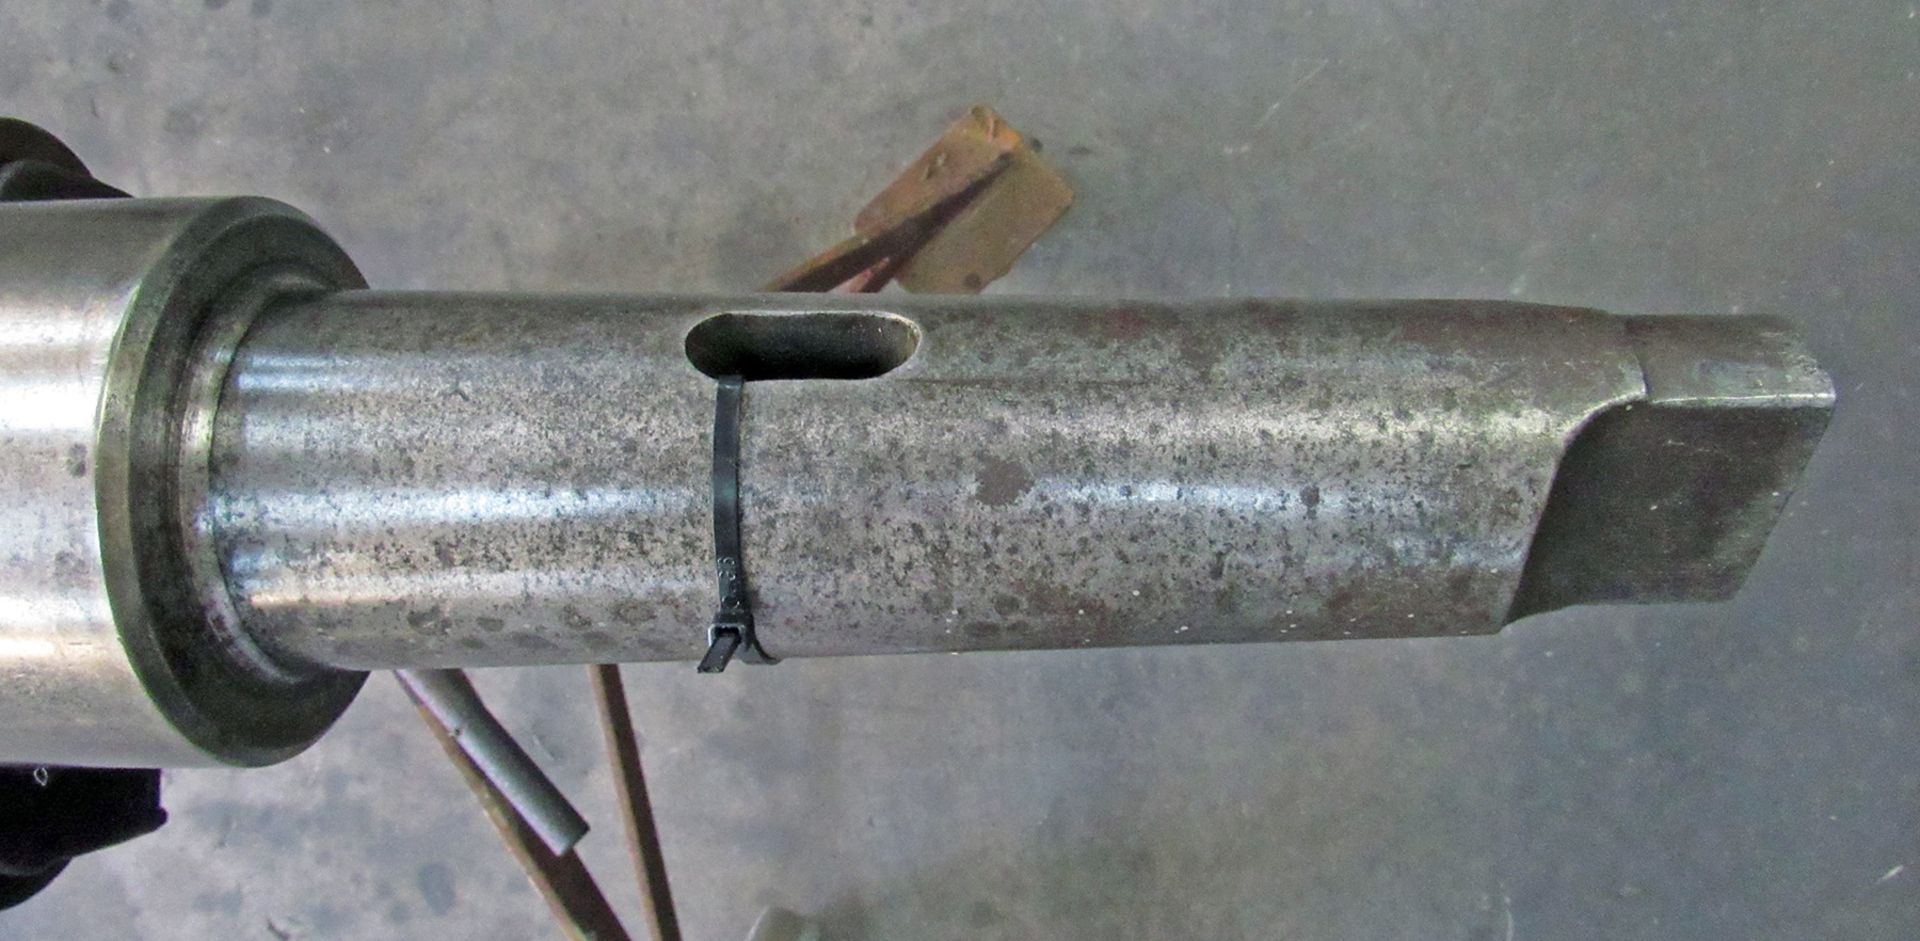 5" X 125" LINE BORING BAR WITH MORSE TAPER - Image 2 of 5